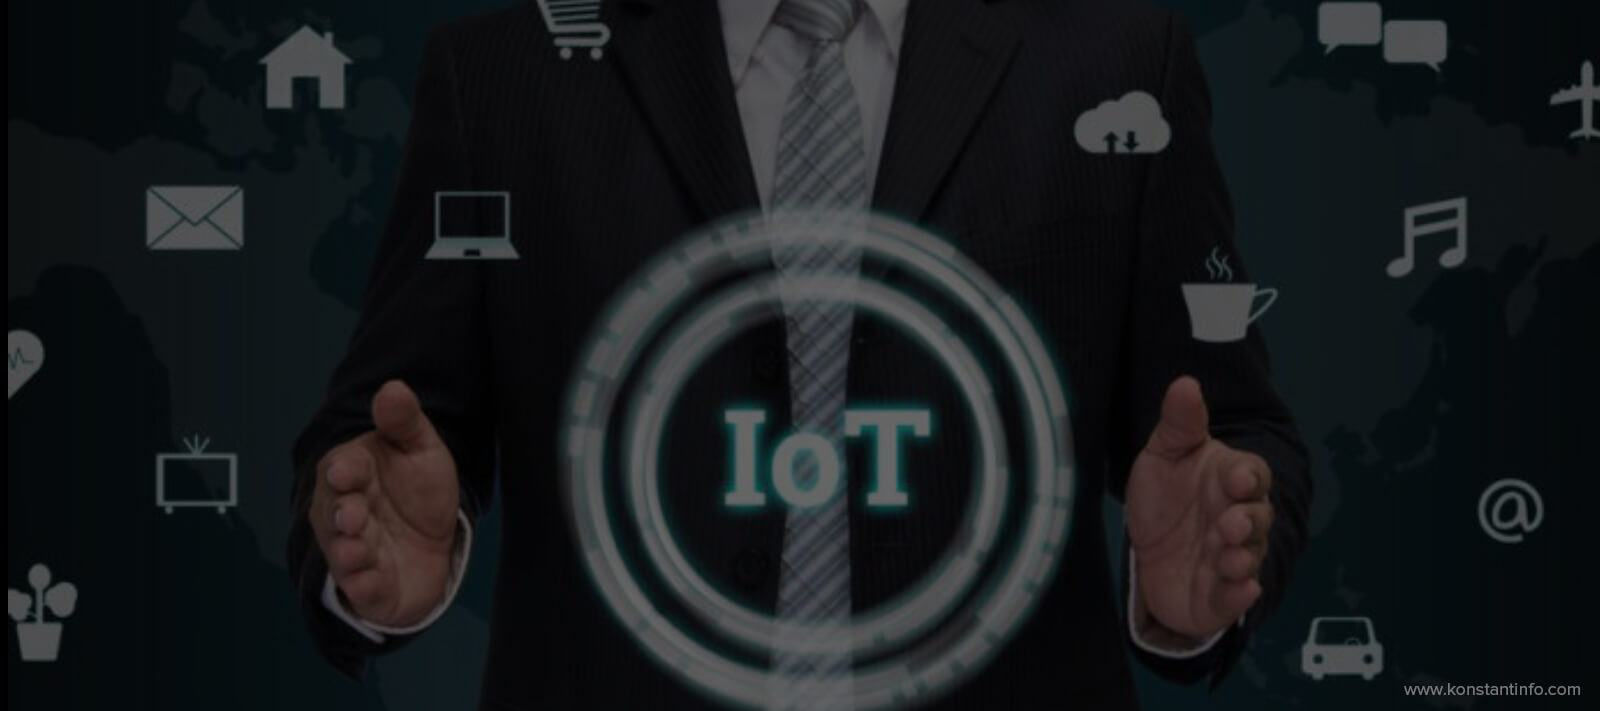 5 Key Things to Know Before Investing in the IoT